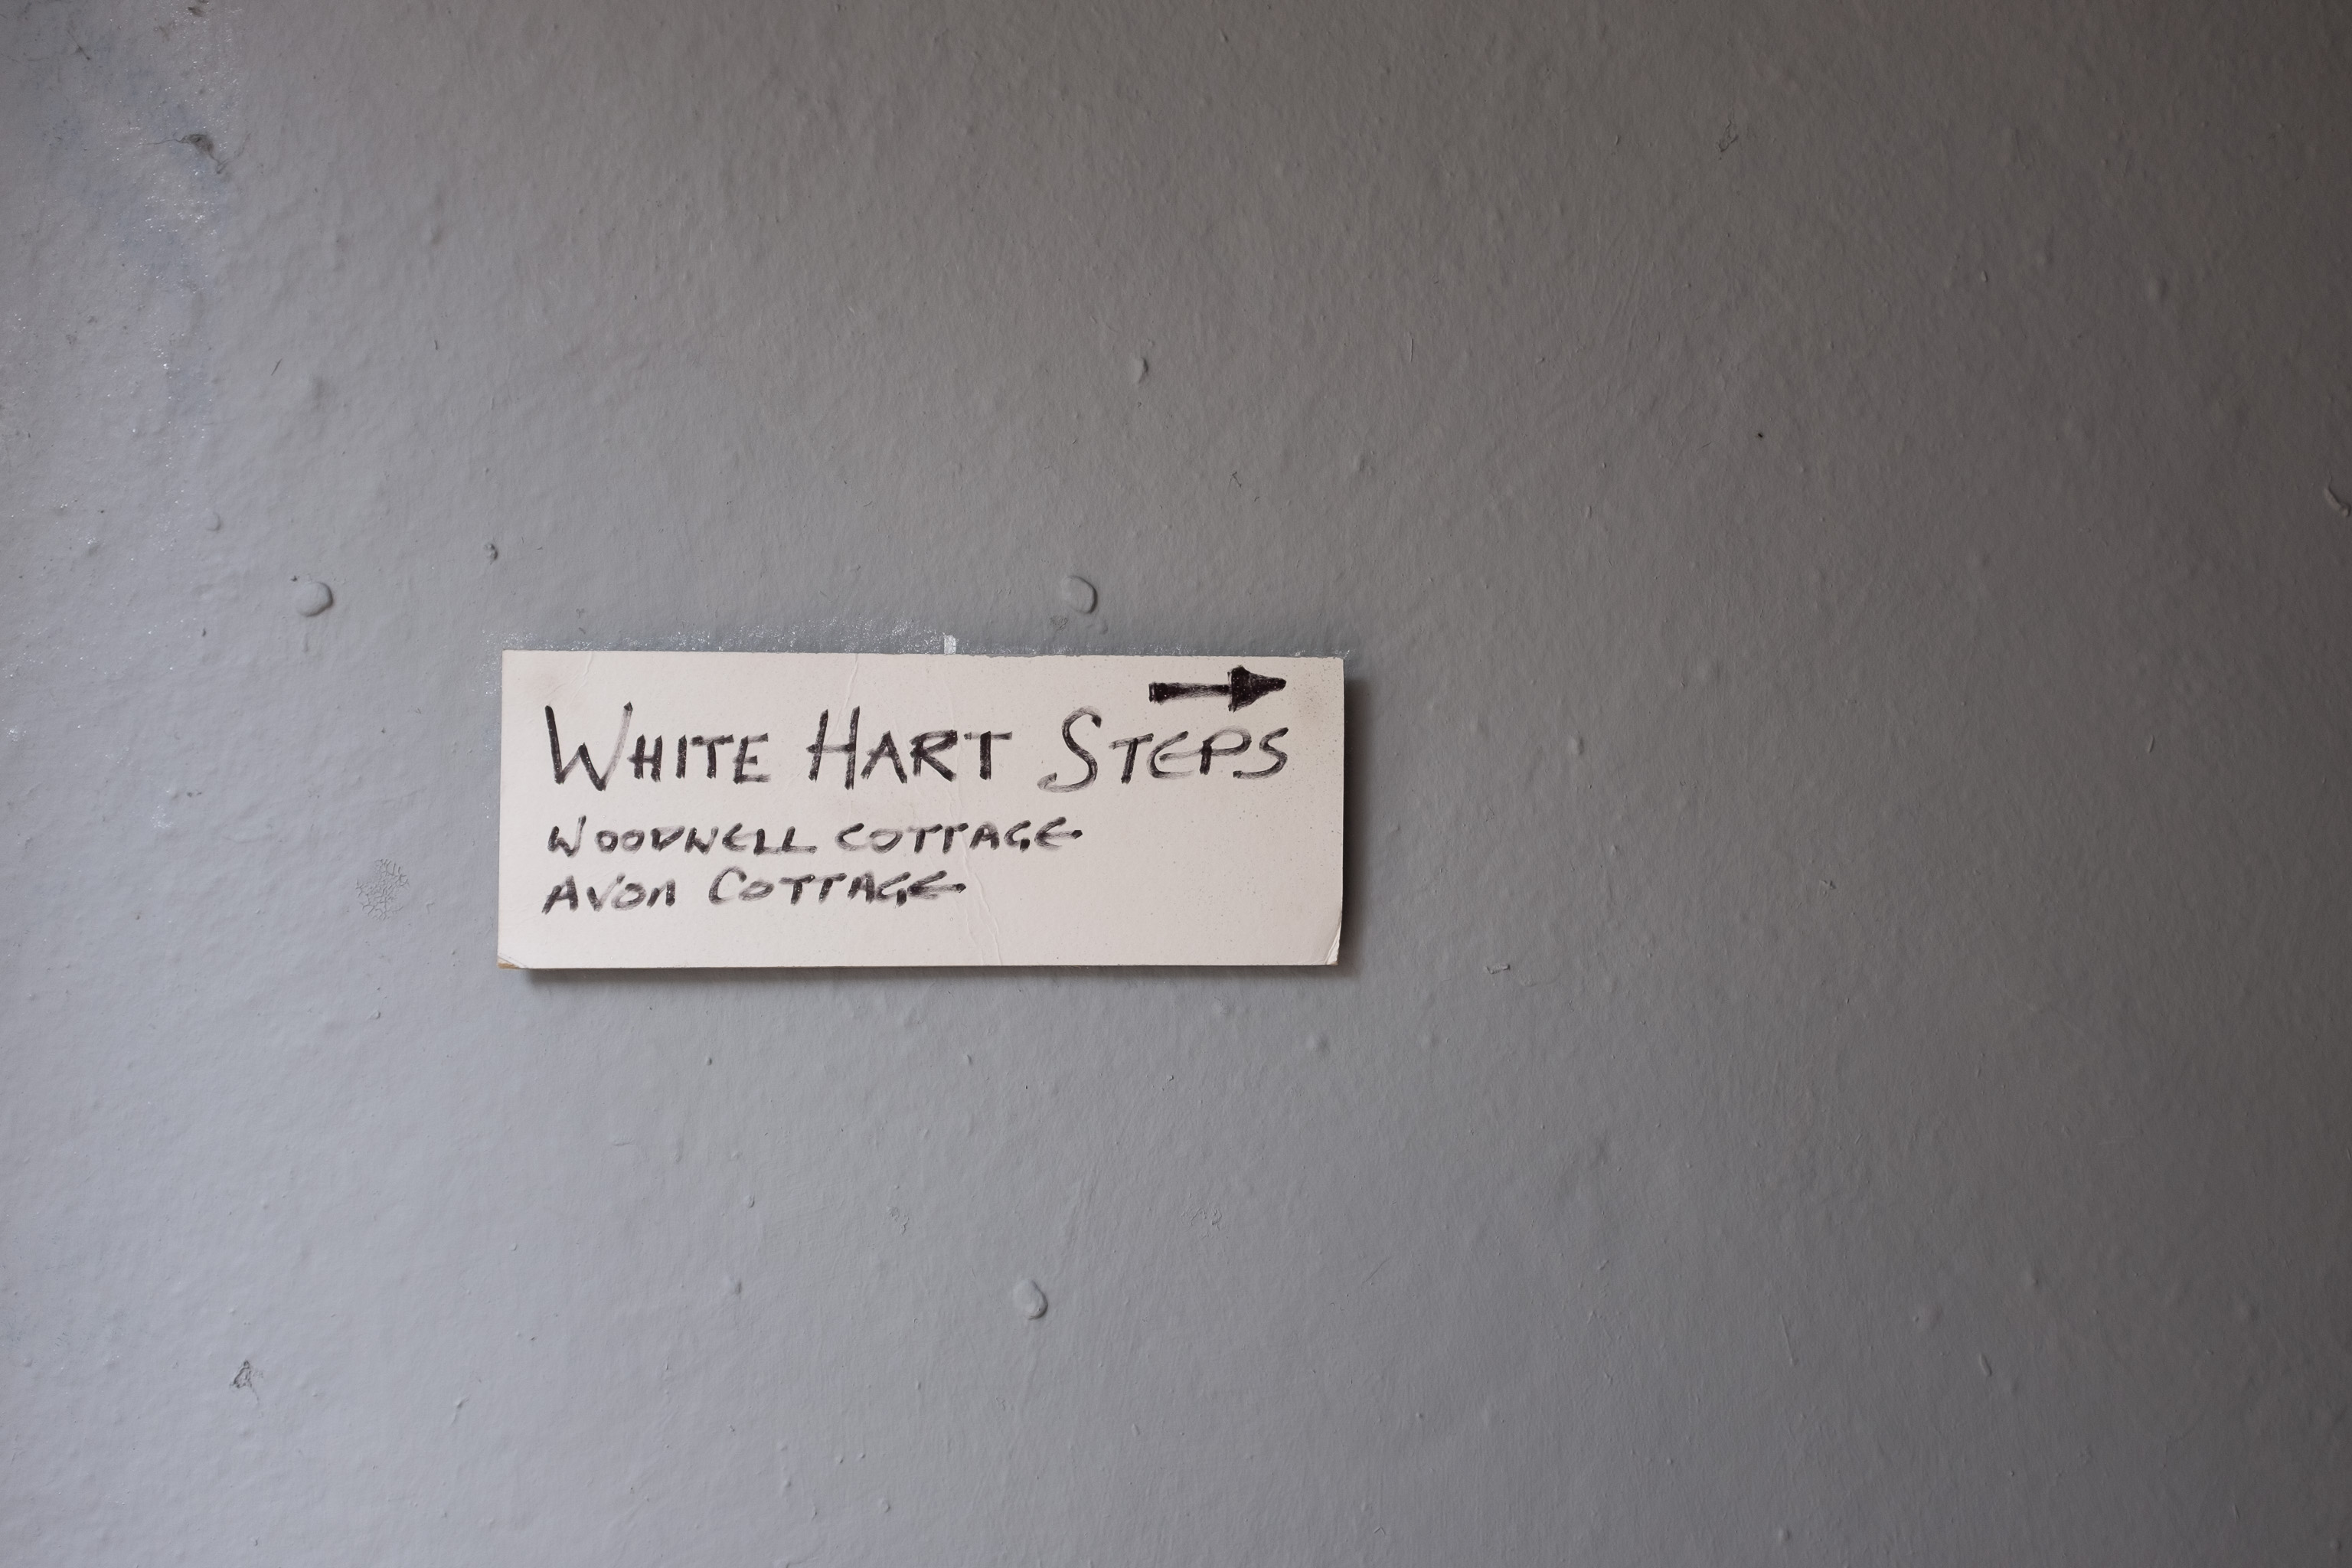 White Hart Steps
This is tacked up in the entrance to St Peter's House. This was once the location of St Peter's Church, demolished in 1938 to make way for the flat...